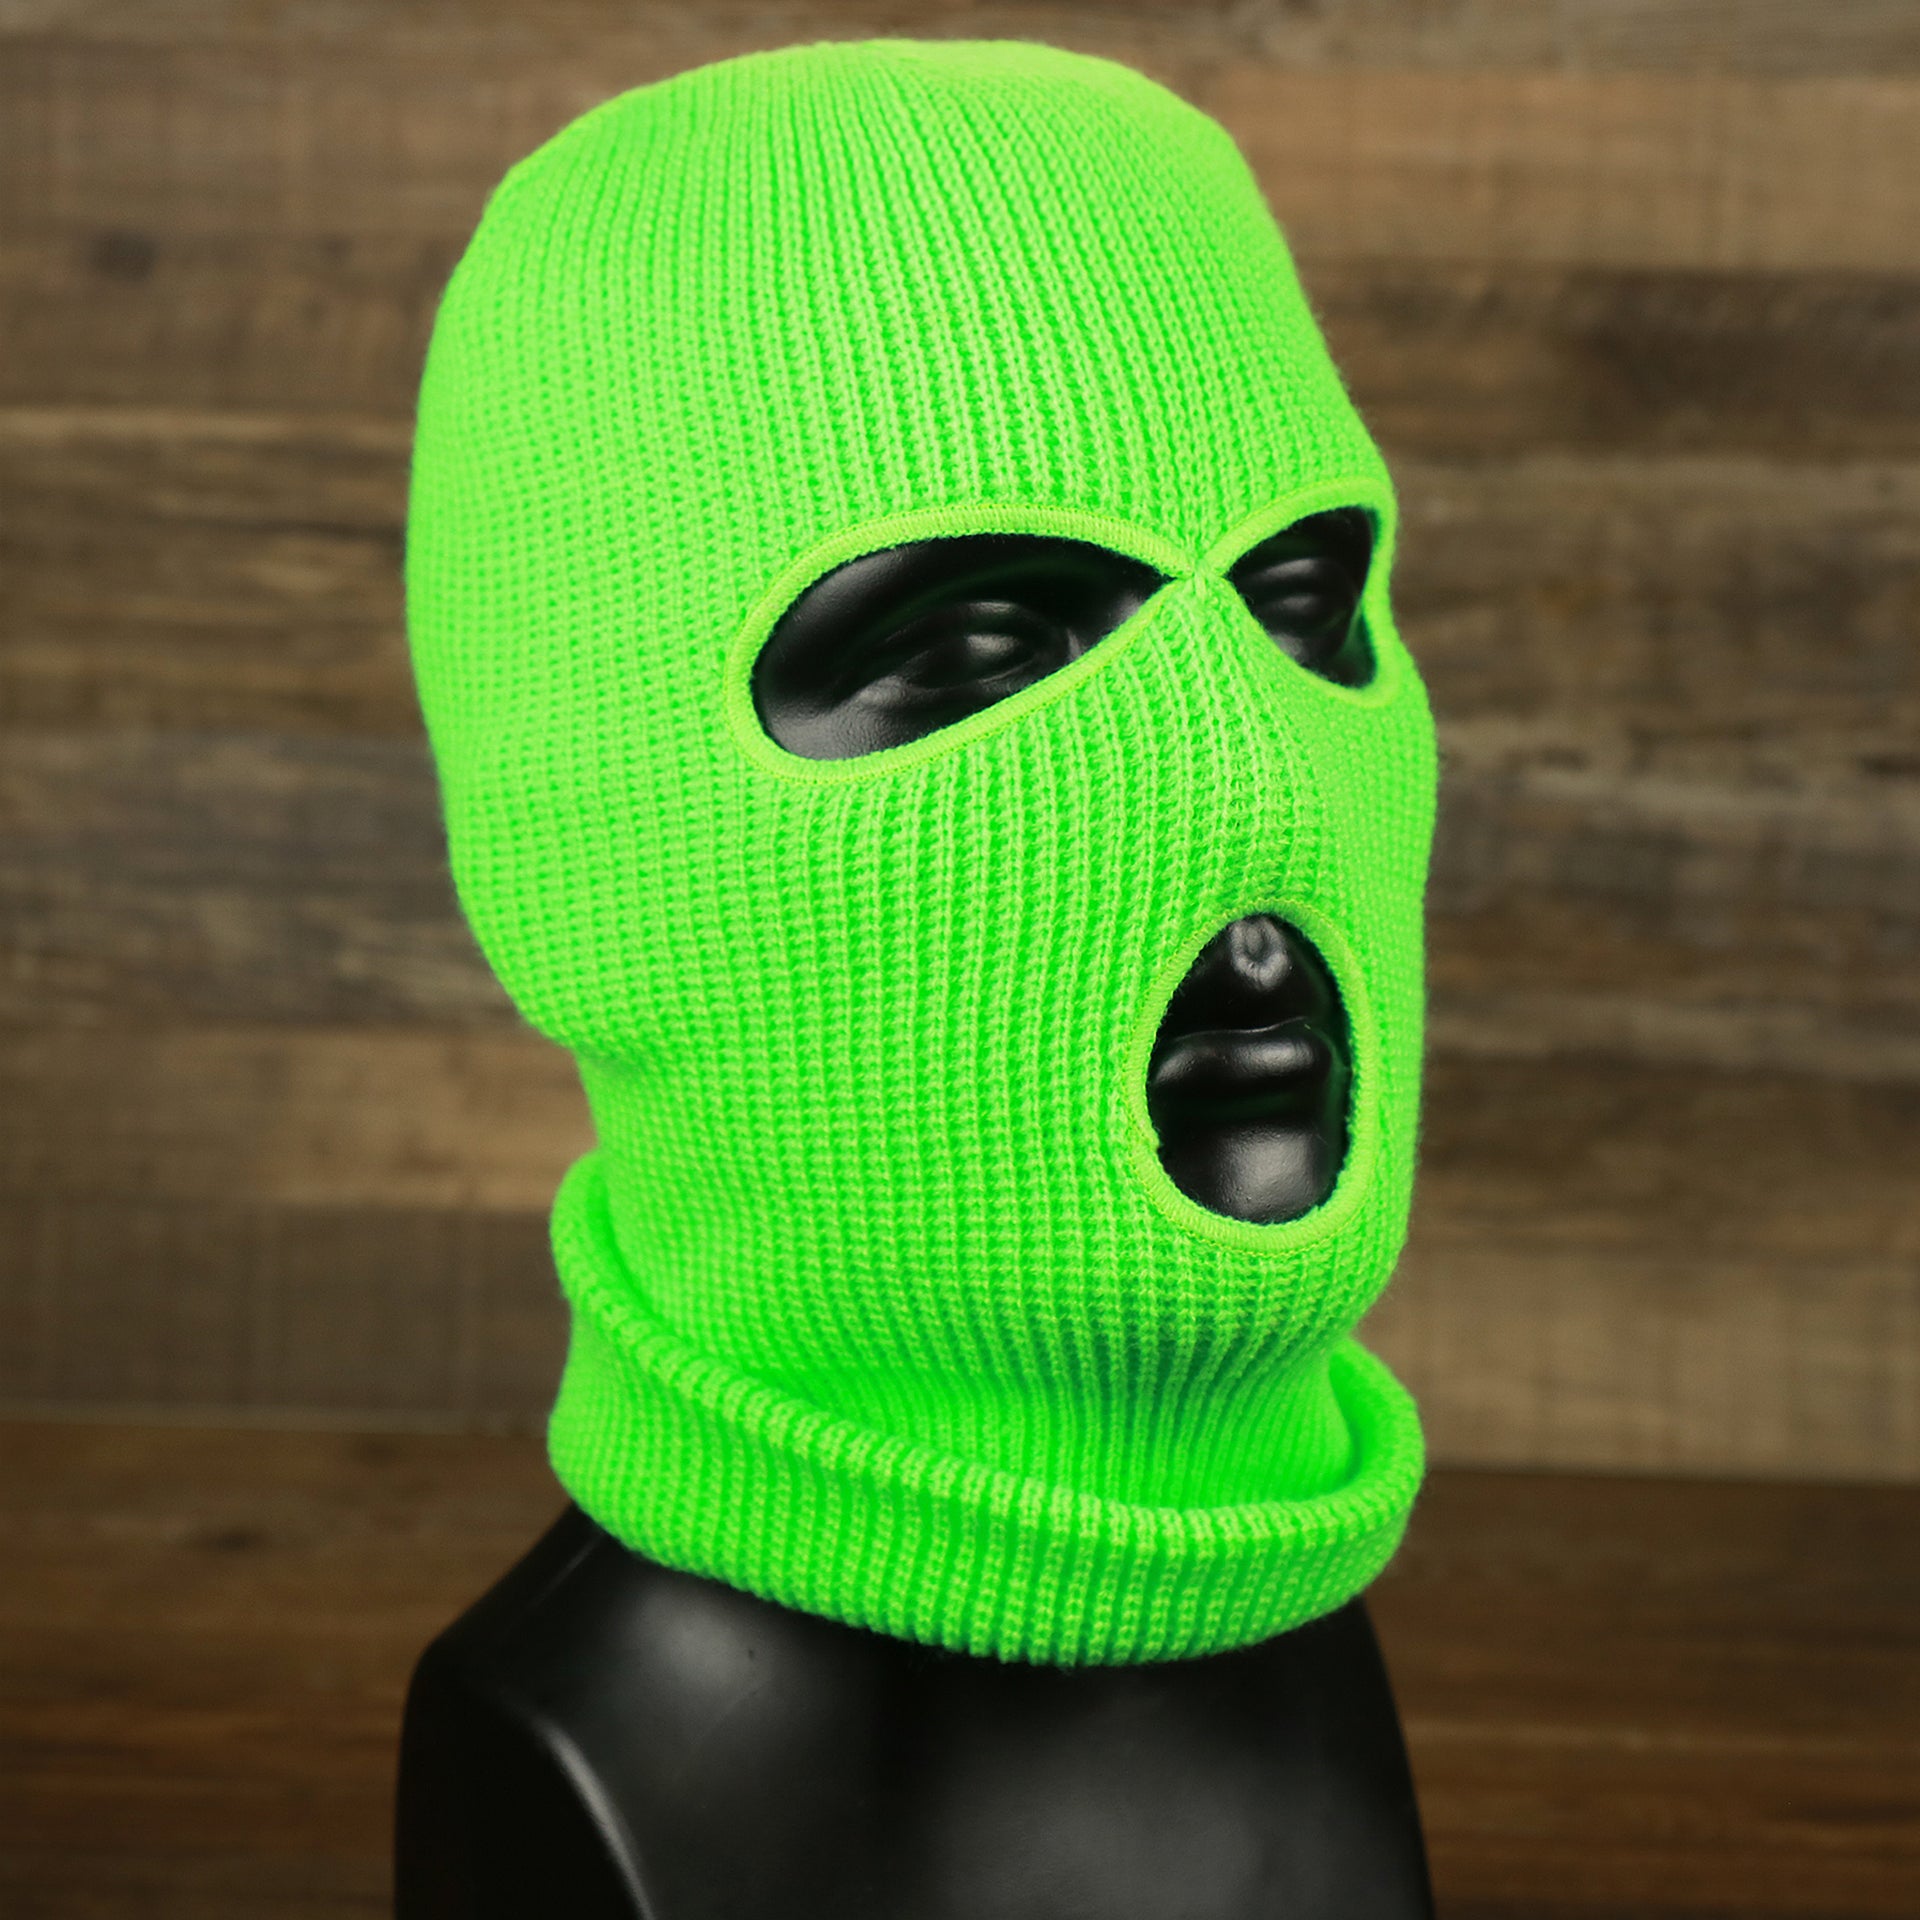 The Safety Green Snug Fit Three Hole Balaclava | Neon Green Knit Ski Mask pulled down